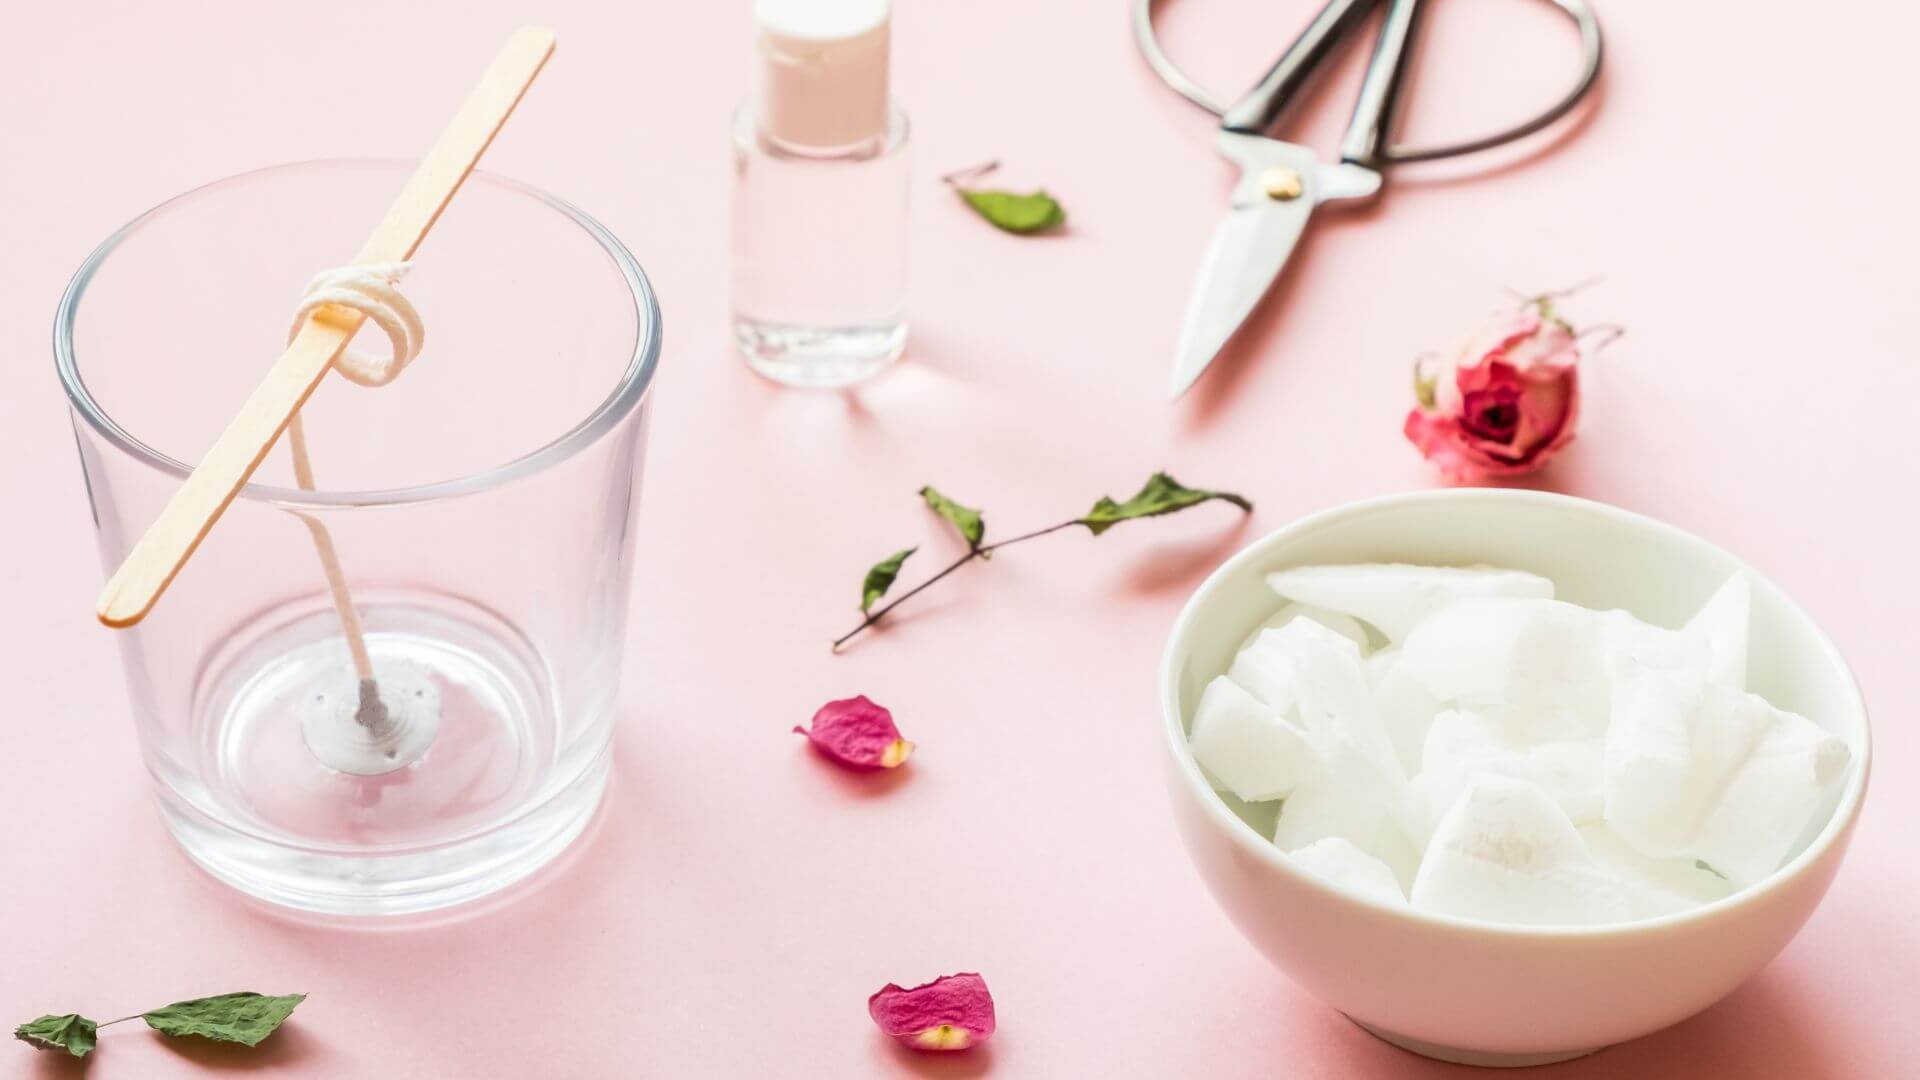 wax, wick, dry roses: ingredients for making handmade candle on a pink background